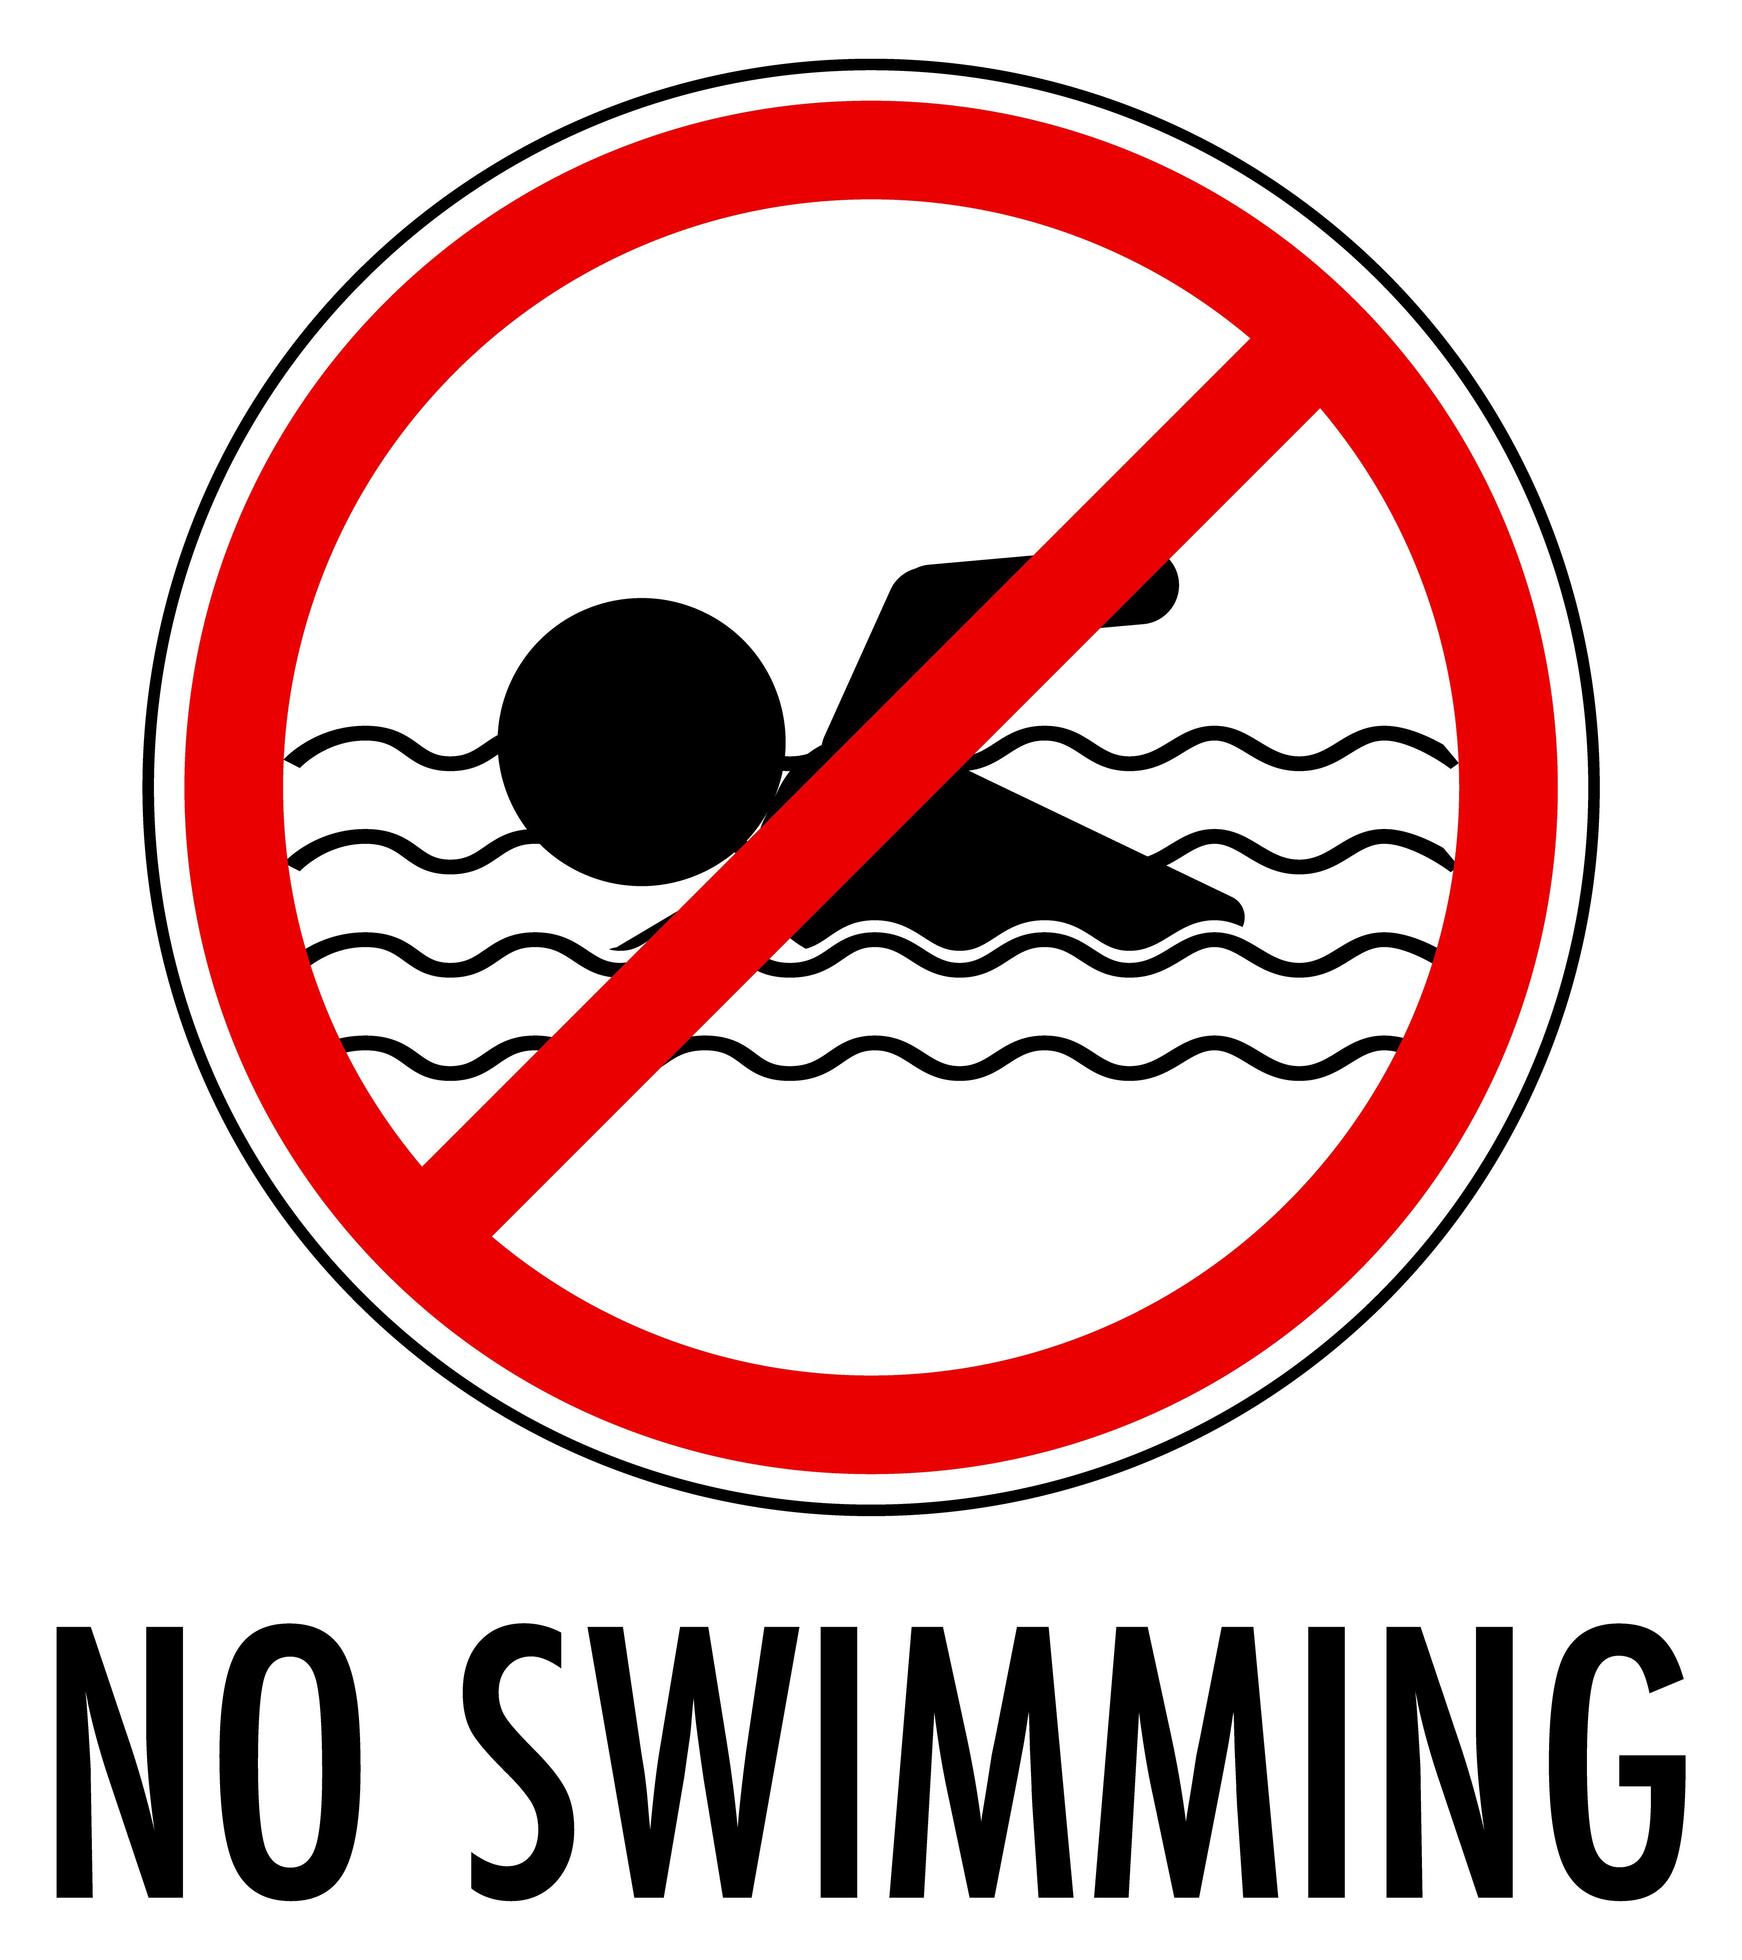 No swimming sign isolated on white background 1481890 Download Free